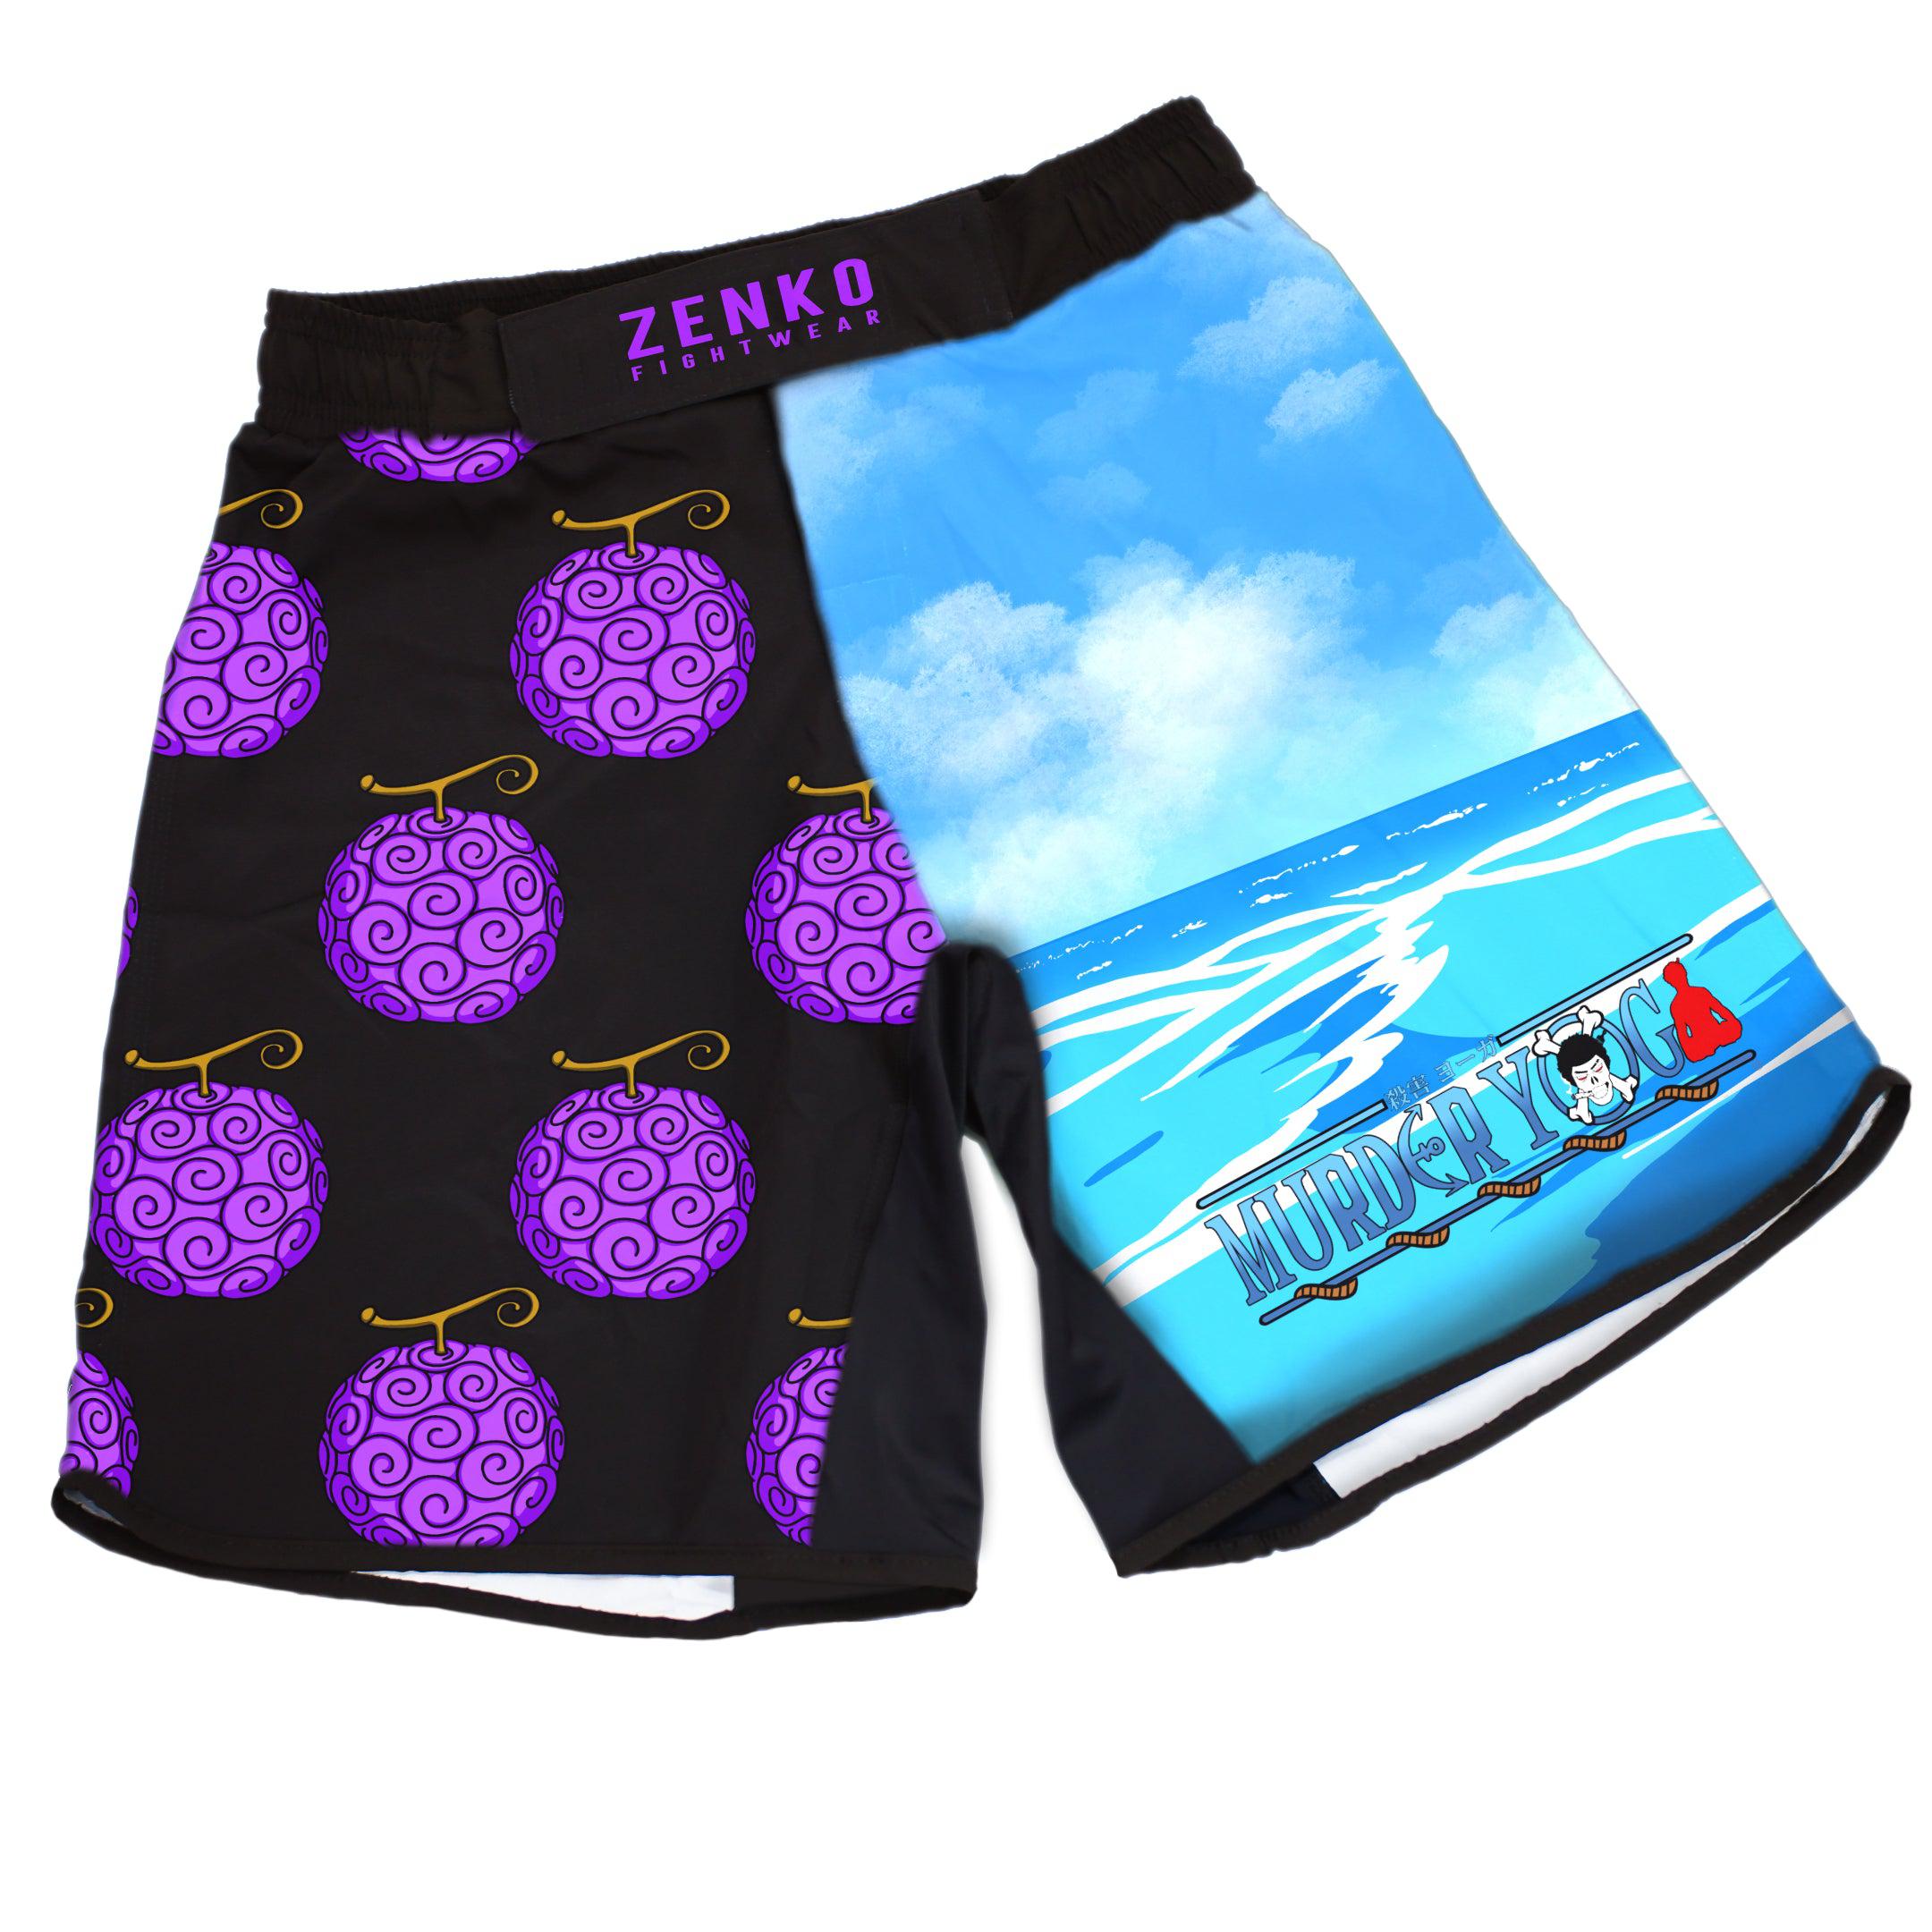 Murder Yoga "King of the Grapplers" Grappling Shorts